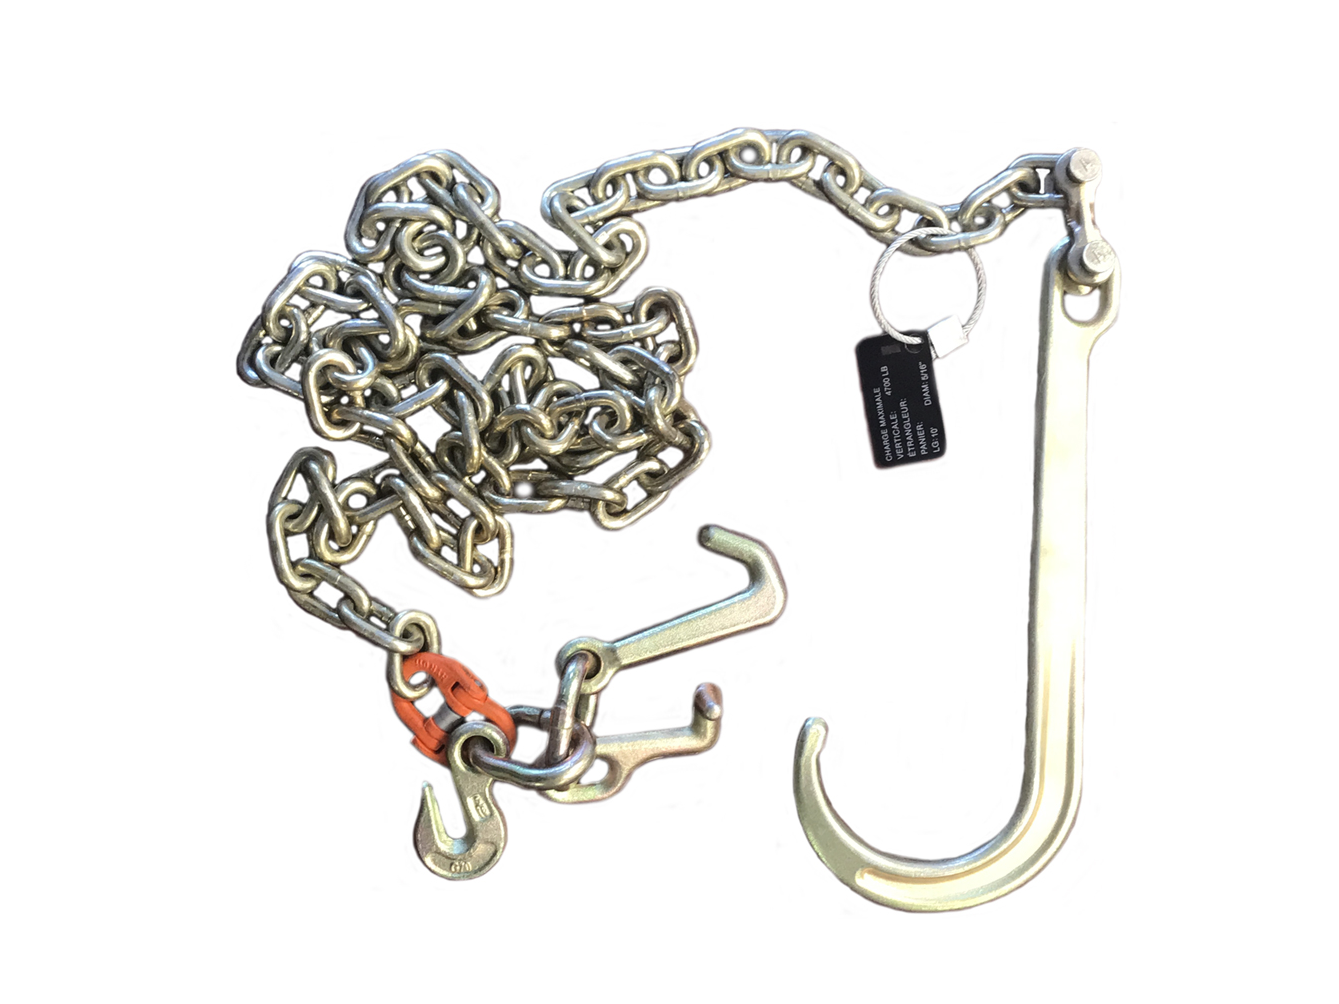 Grade 70 chain sling for towing